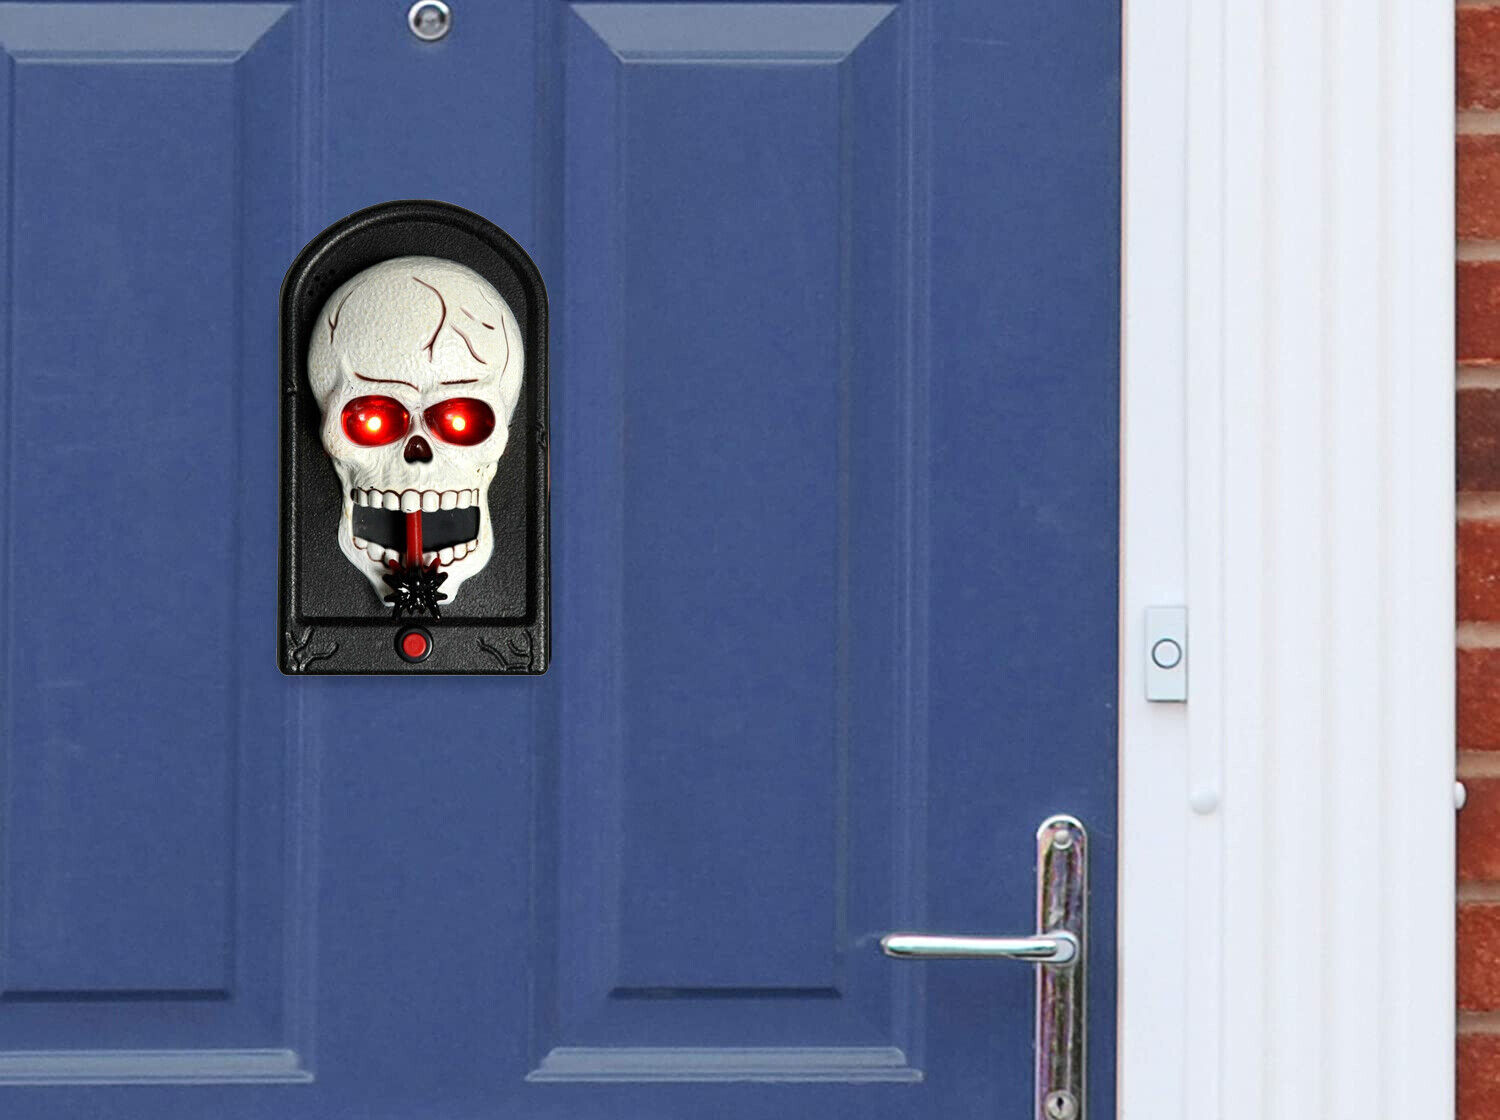 NXW Halloween Skull Doorbell with LED Eyes and Sound Effect